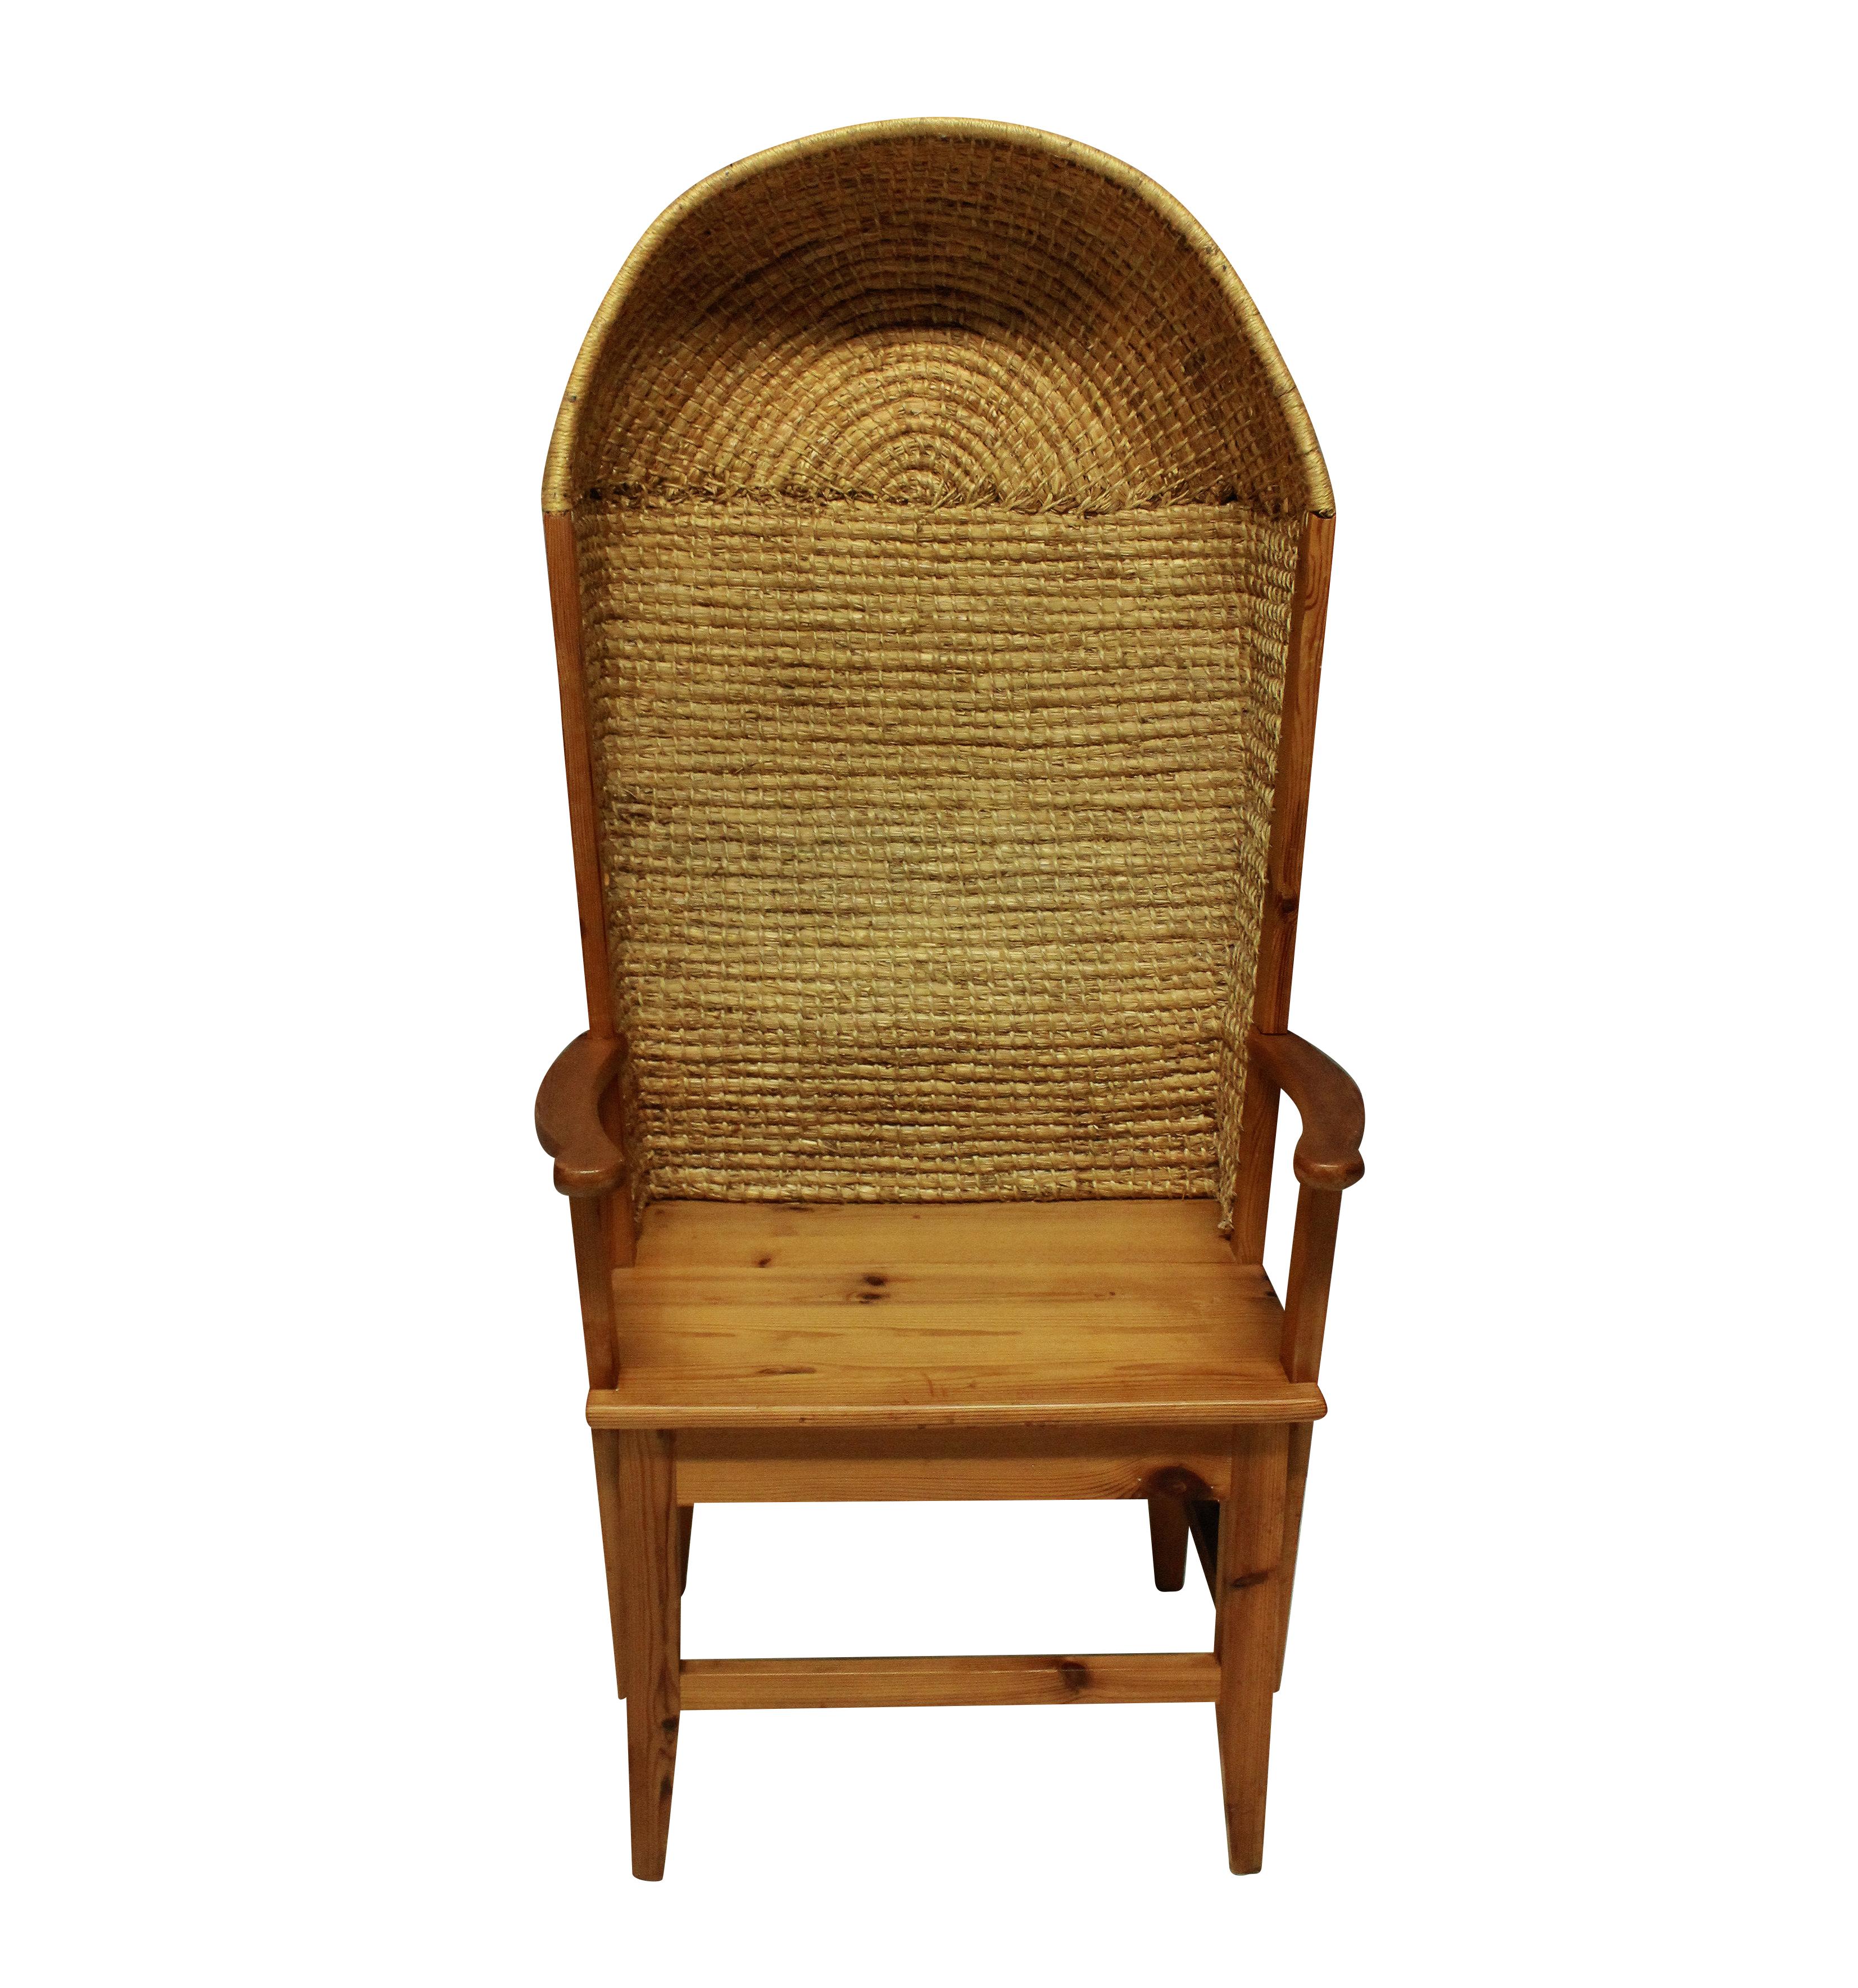 A midcentury Scottish Orkney armchair in pine with woven rush back.